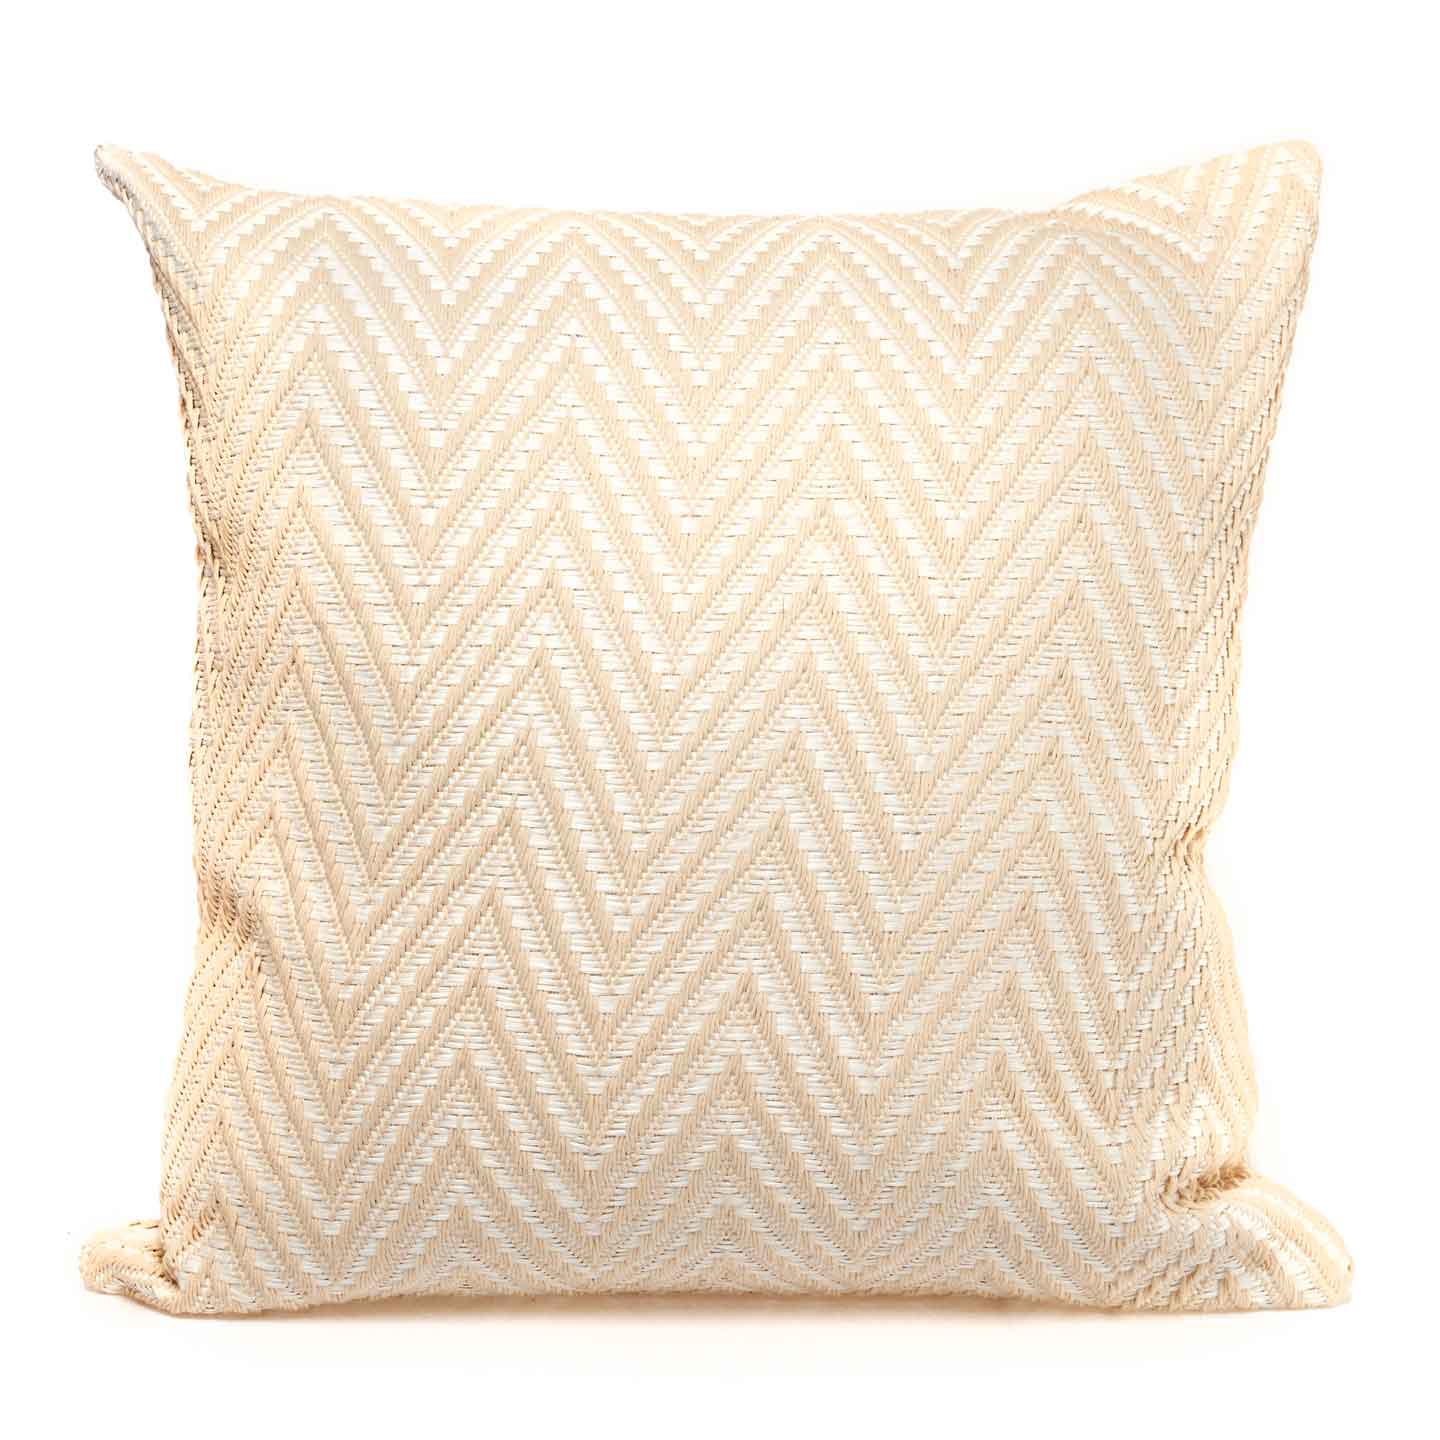 The Mary pillow by Beau Home